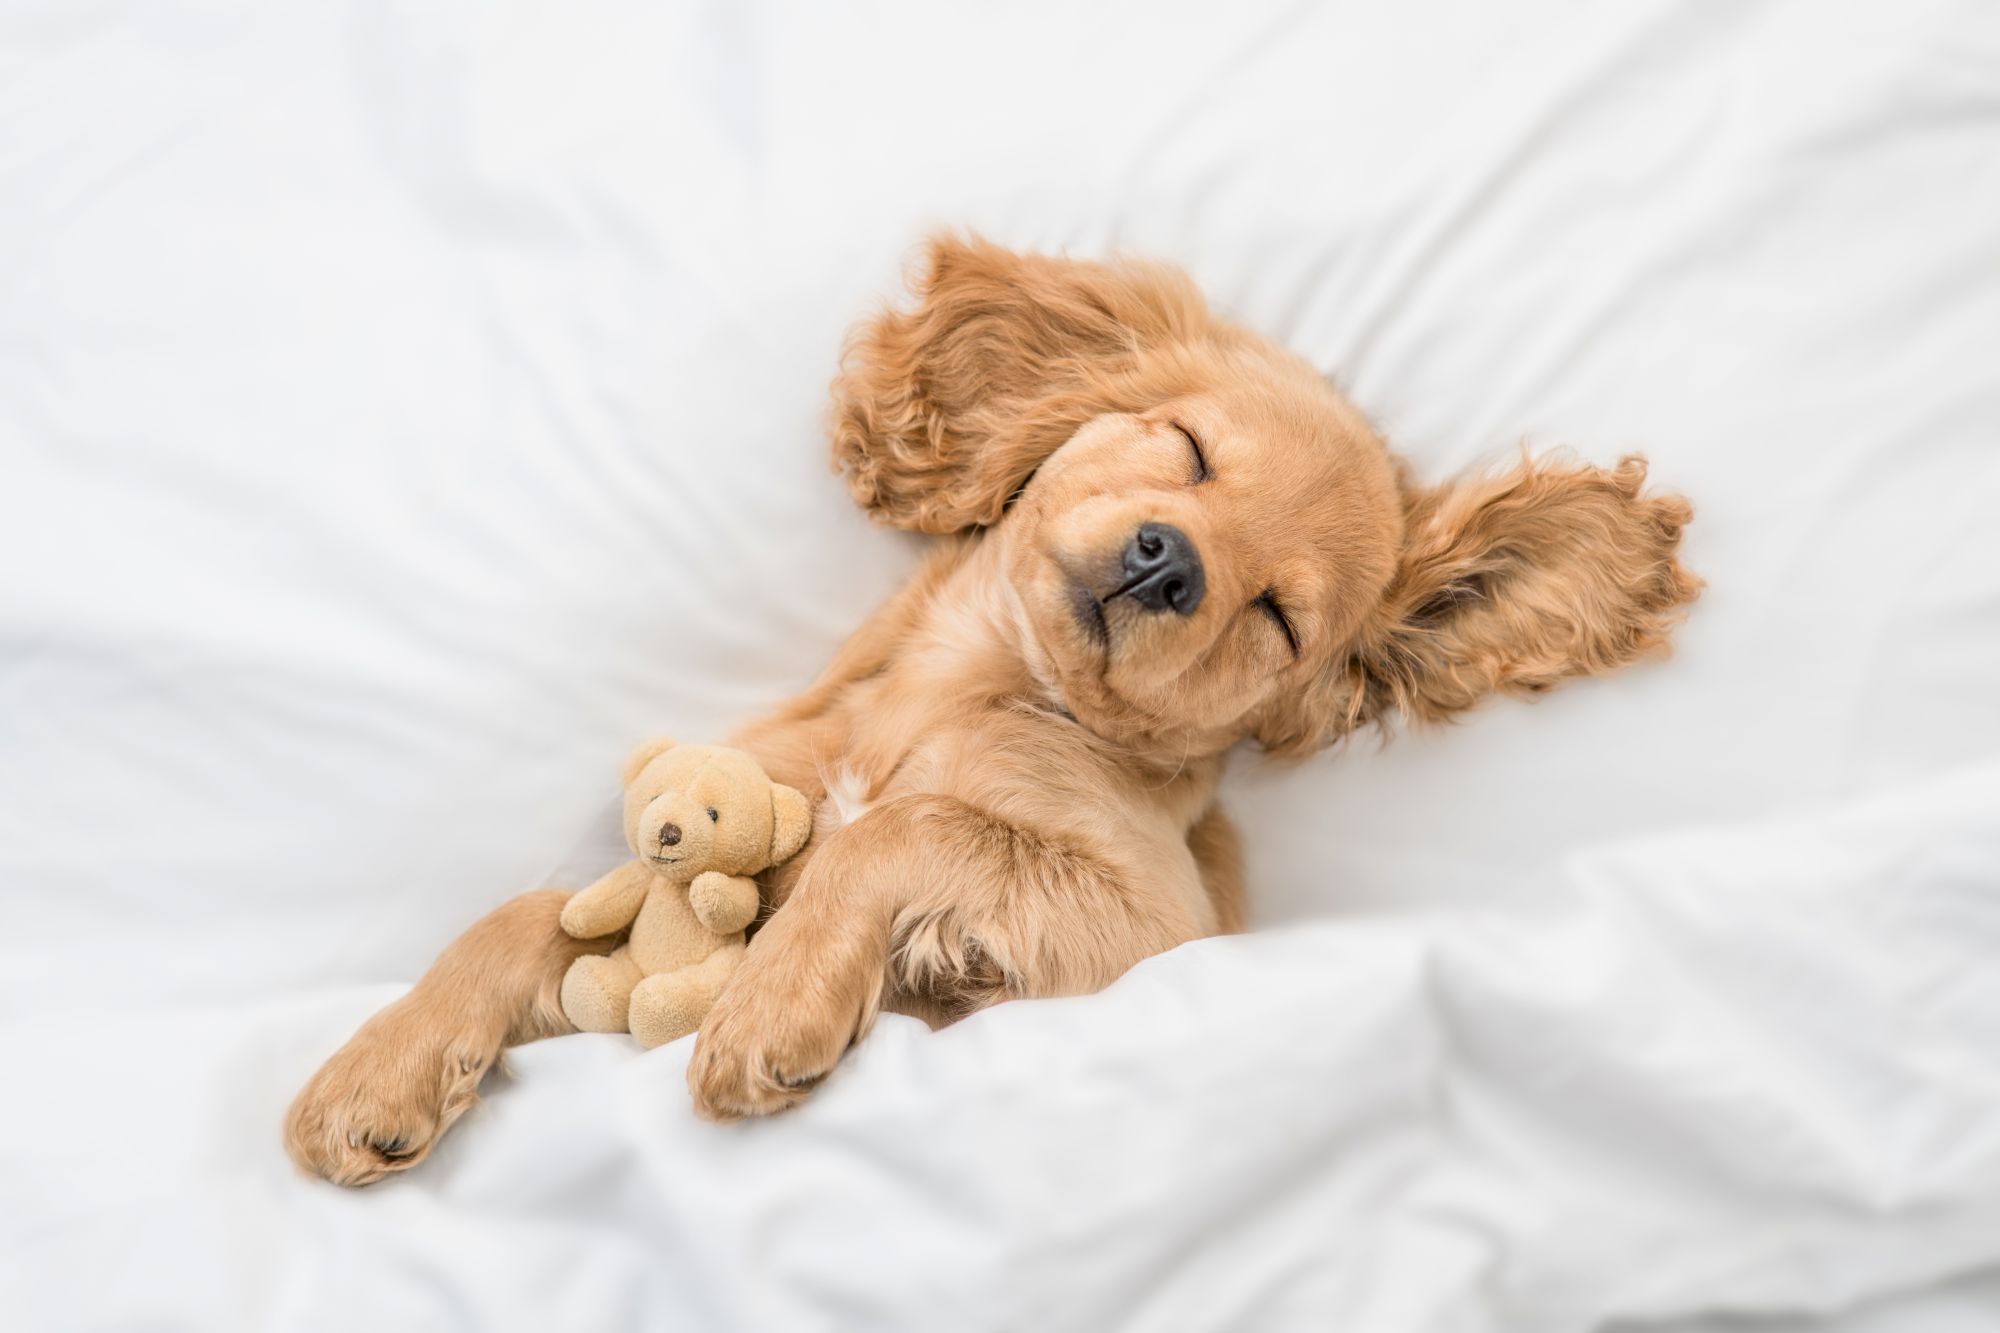 A fluffy brown puppy is sleeping on a white bed, cuddling a tiny teddy bear in its paws, and displaying an adorable, peaceful expression.